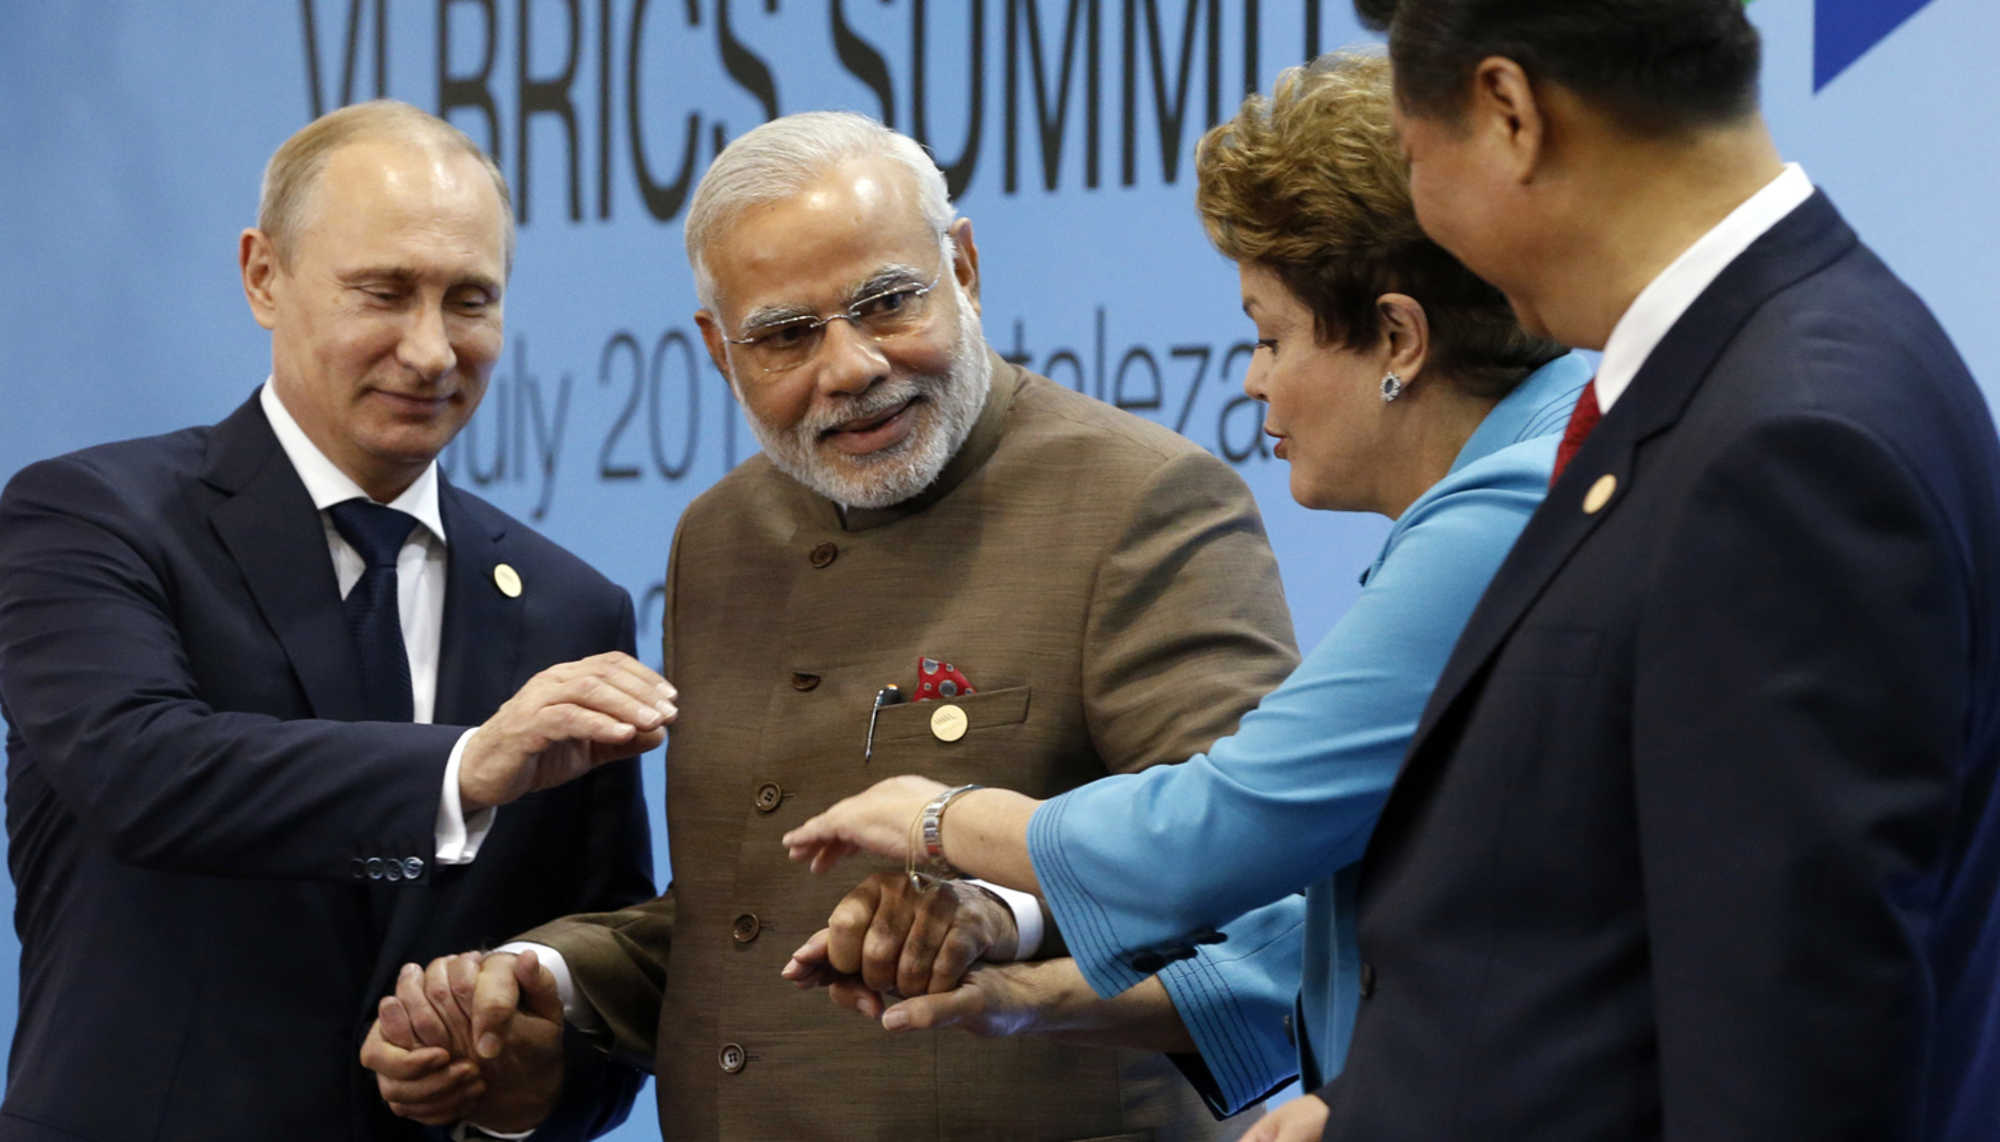 India's Prime Minister Narendra Modi with other heads of state at the BRICS Summit in Brazil.